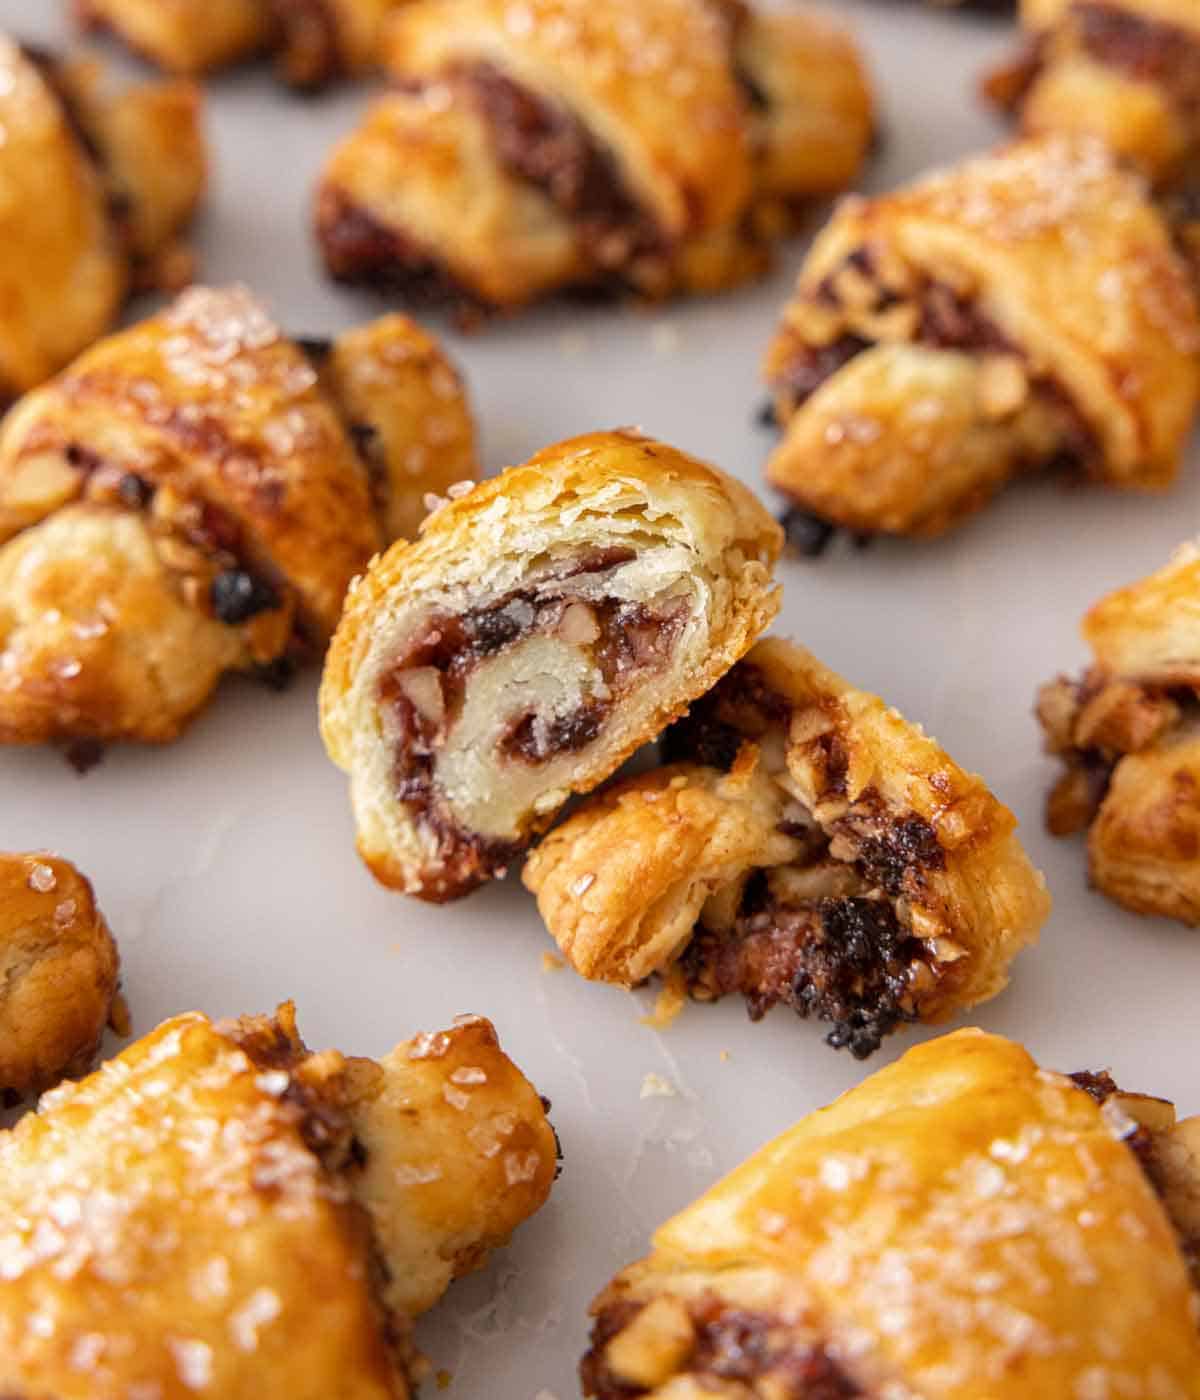 Multiple rugelach with one cut in half, showing the cross section.